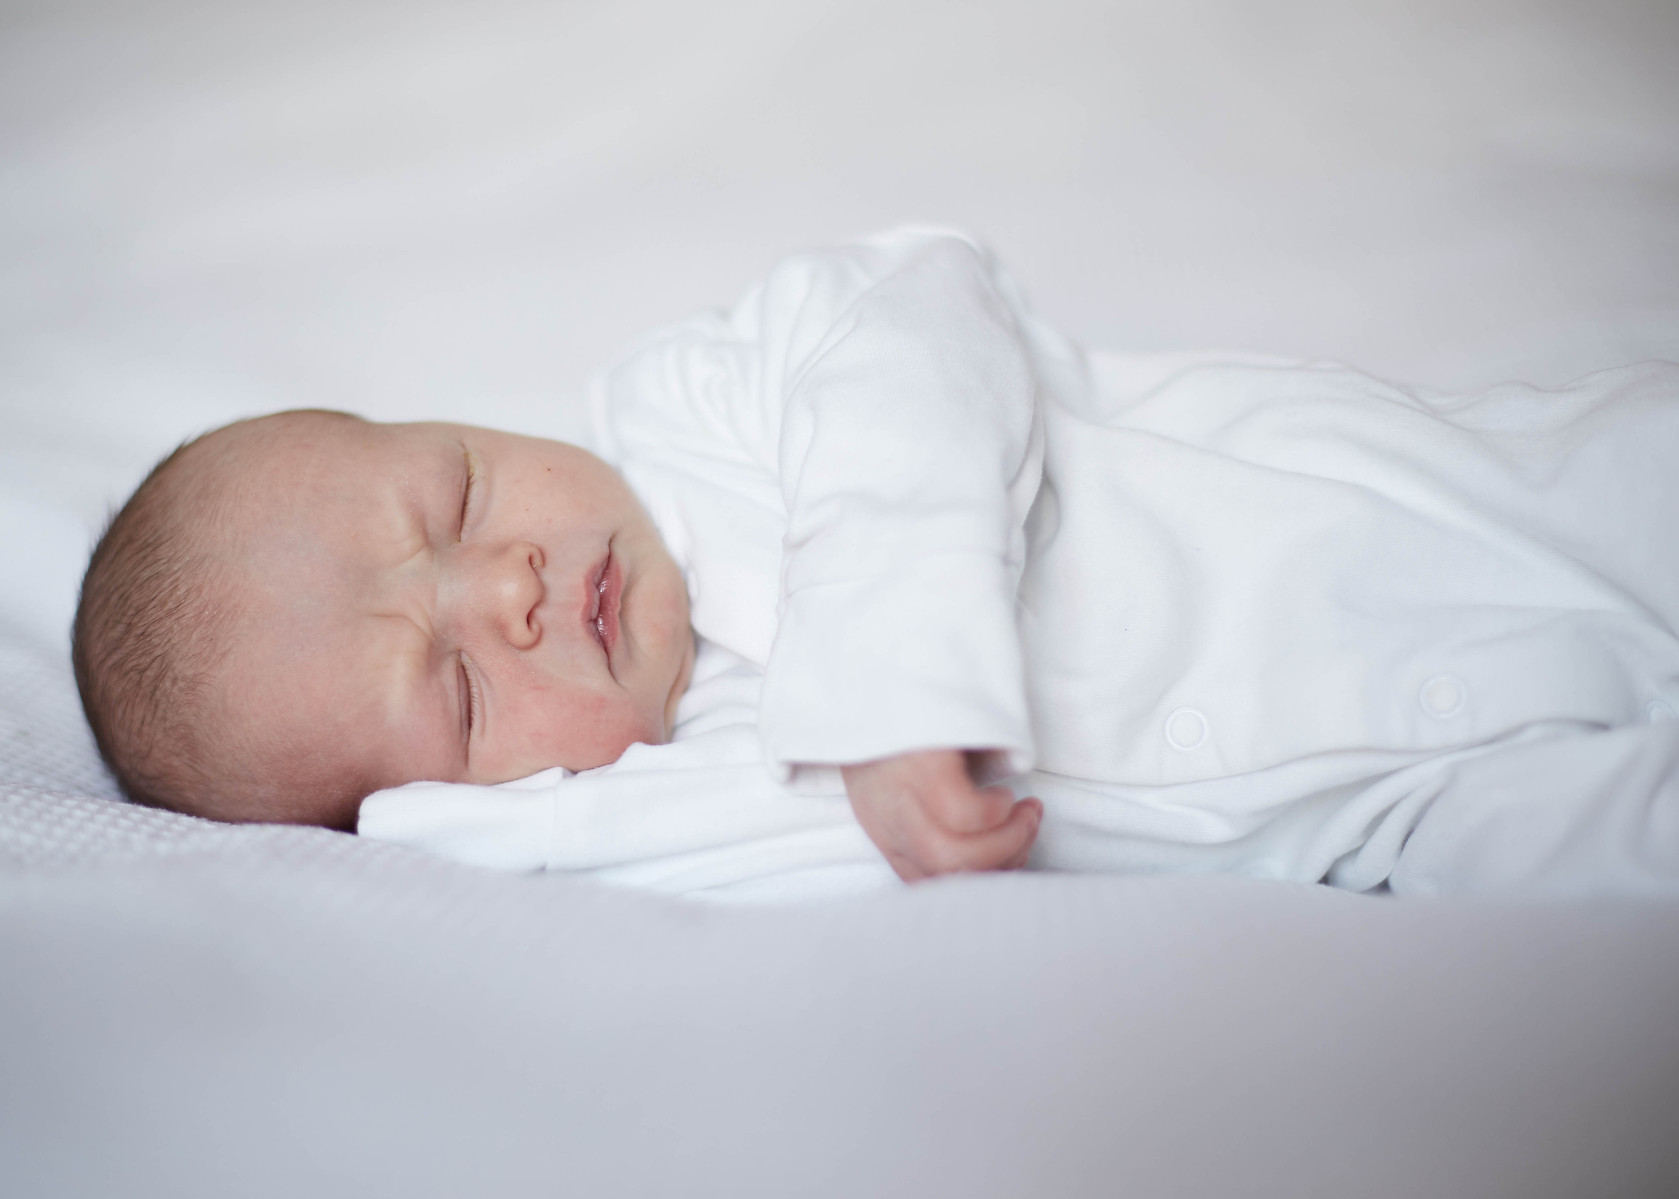 Newborn photograph of a baby wearing white on white background